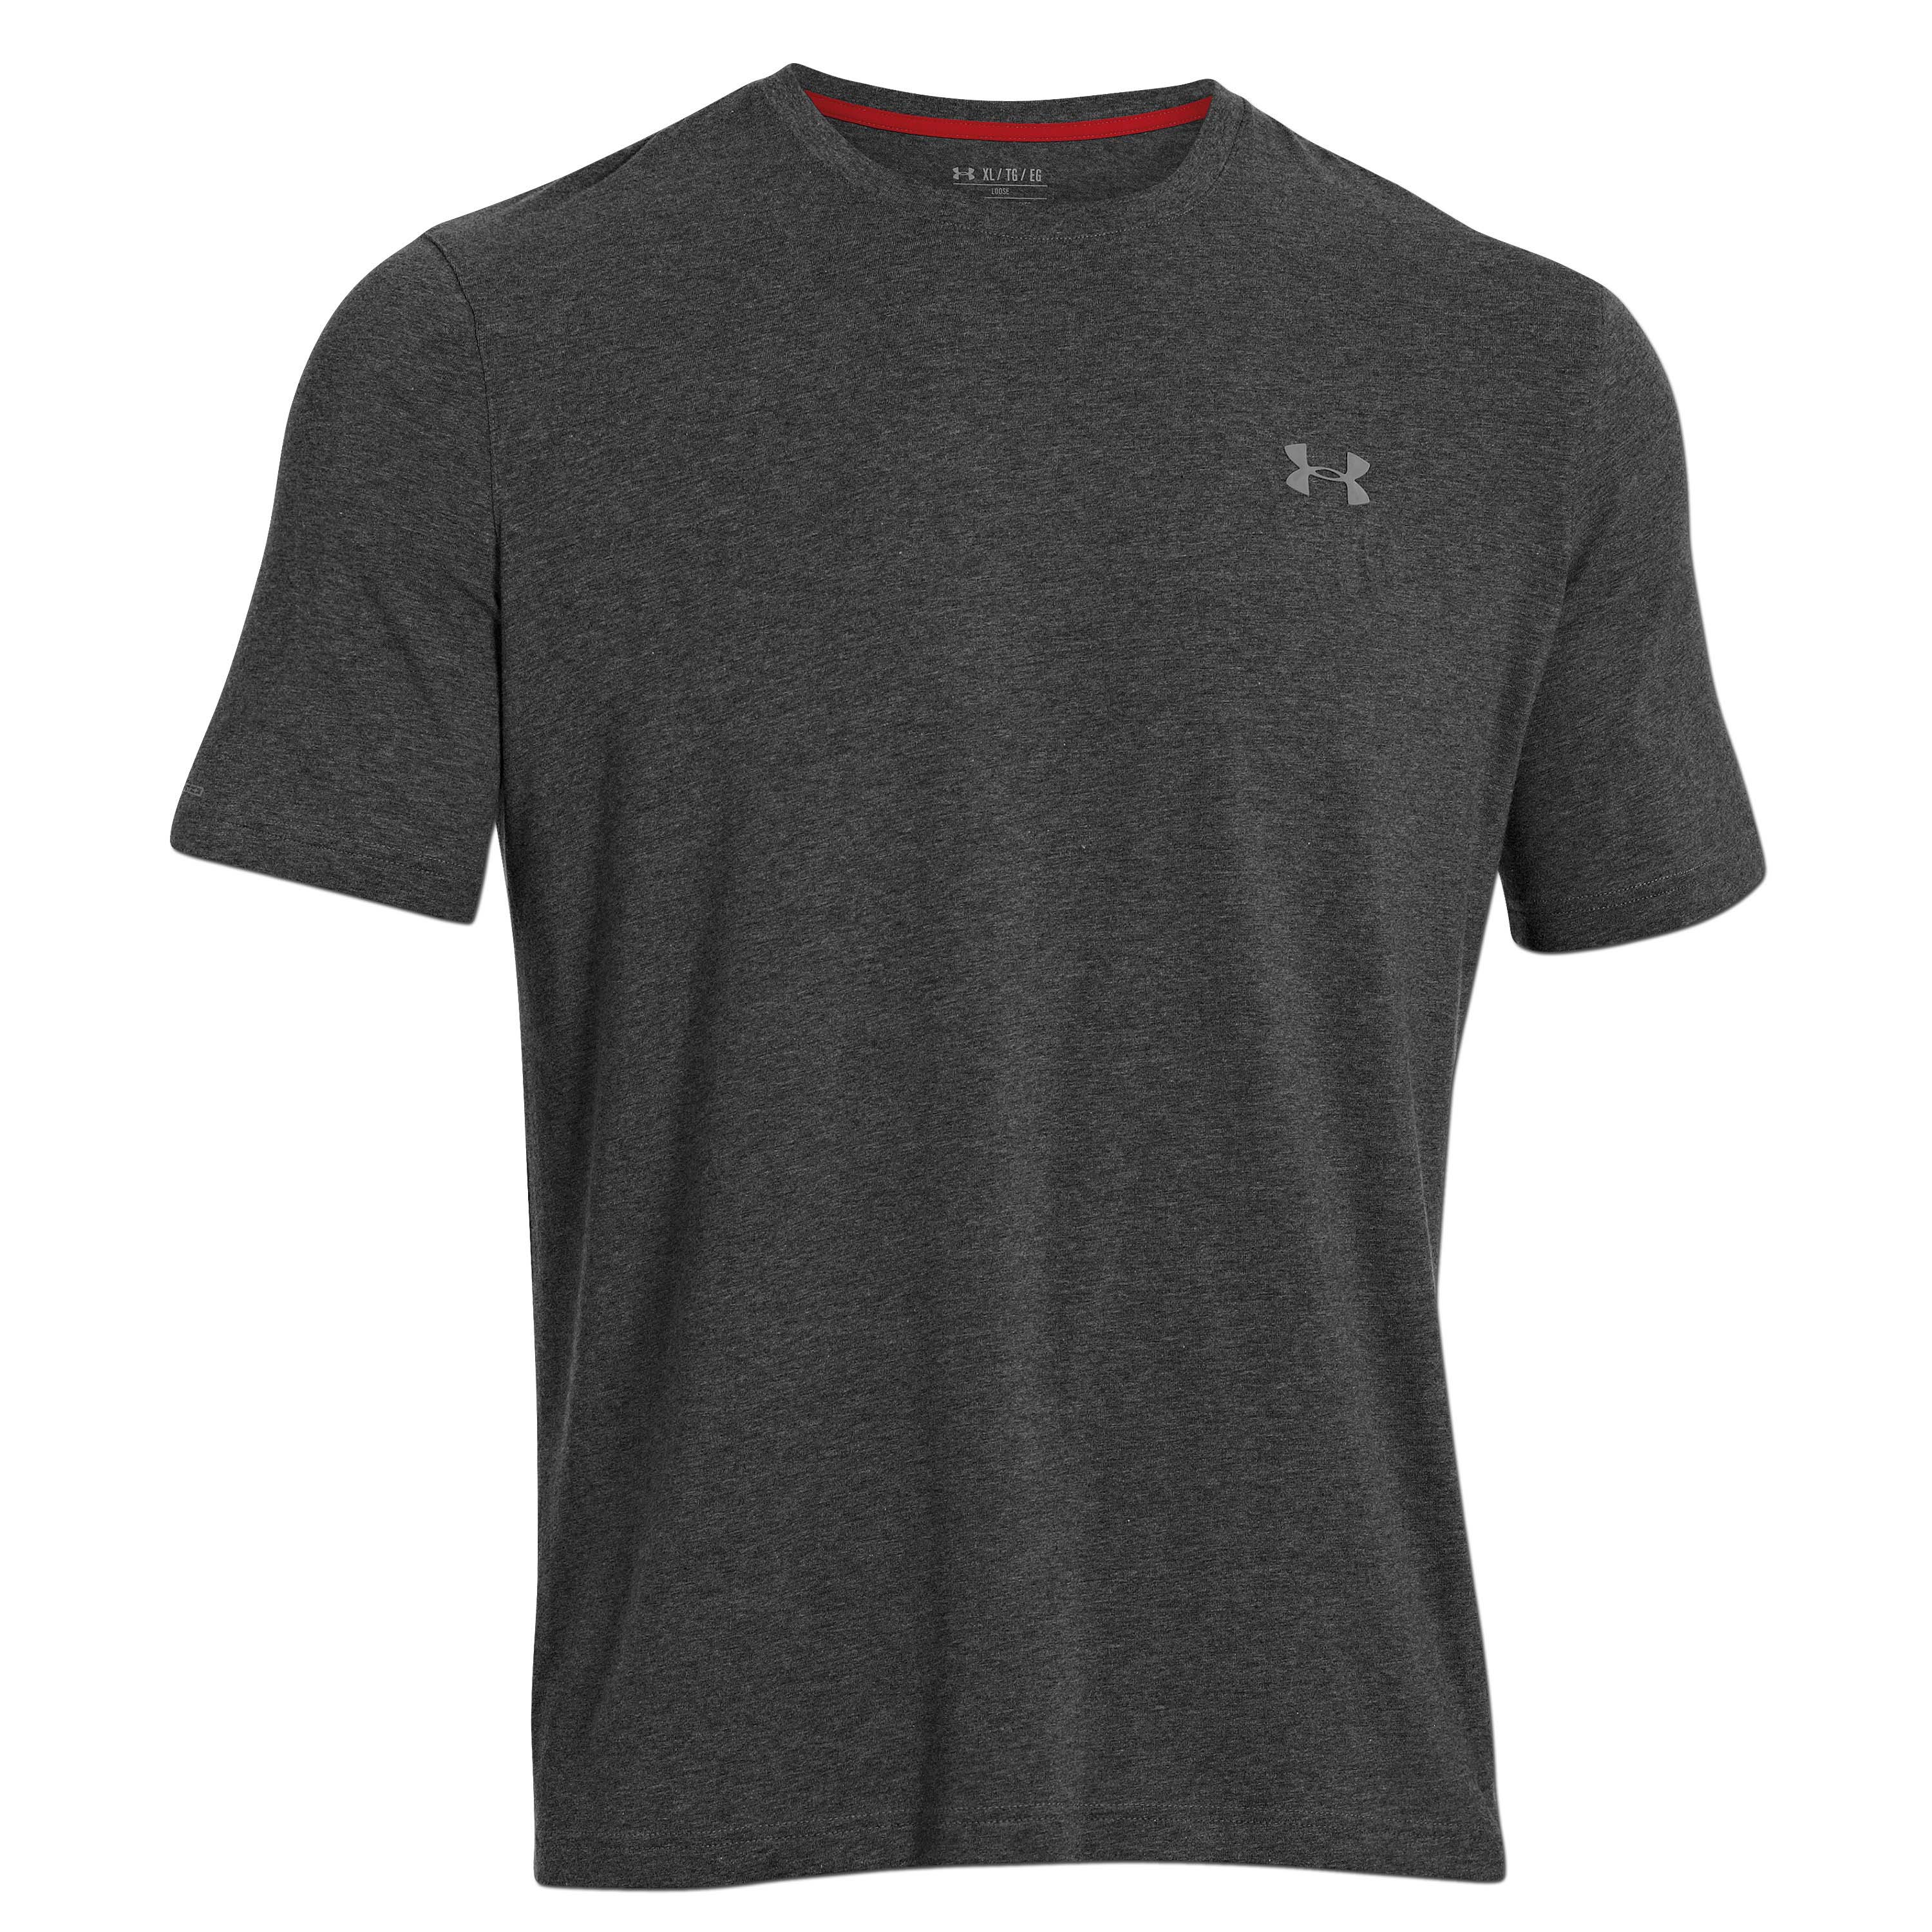 Under Armour T-Shirt Charged Cotton charcoal gray | Under Armour T ...